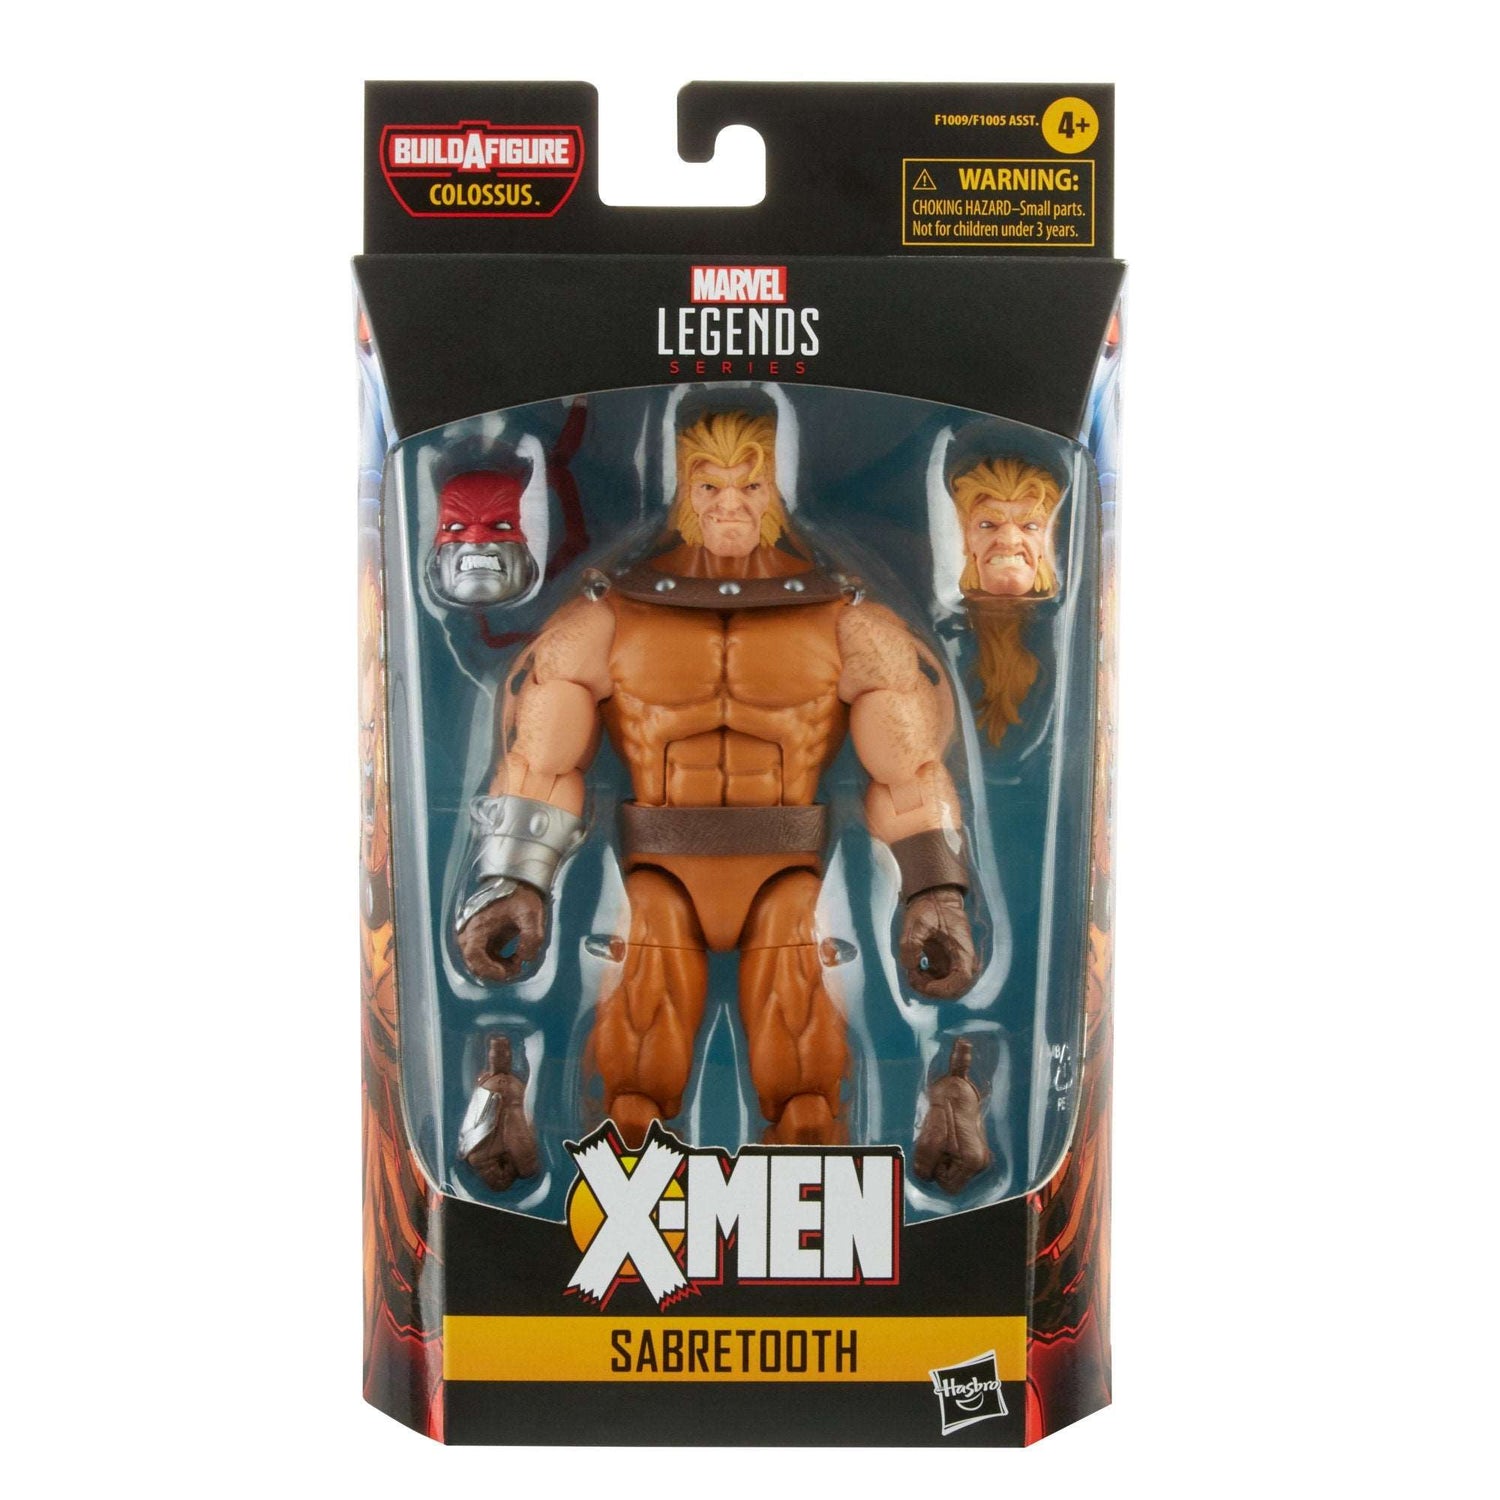 Hasbro Marvel Legends Series X-men Age of Apocalypse Sabertooth figure in packaging front of box